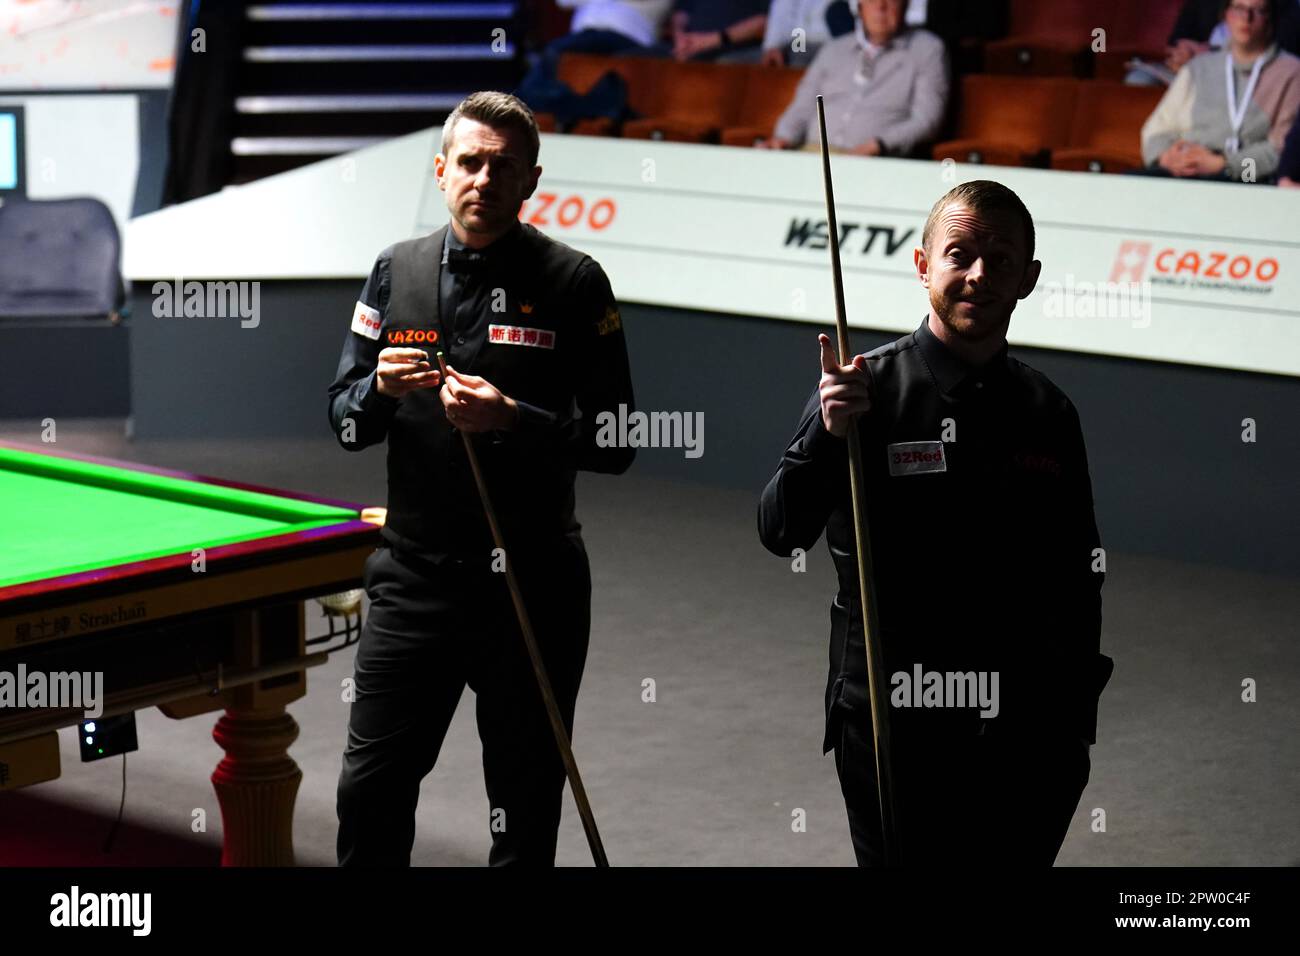 Mark Allen and Mark Selby (left) discuss the score during their match on day fourteen of the Cazoo World Snooker Championship at the Crucible Theatre, Sheffield